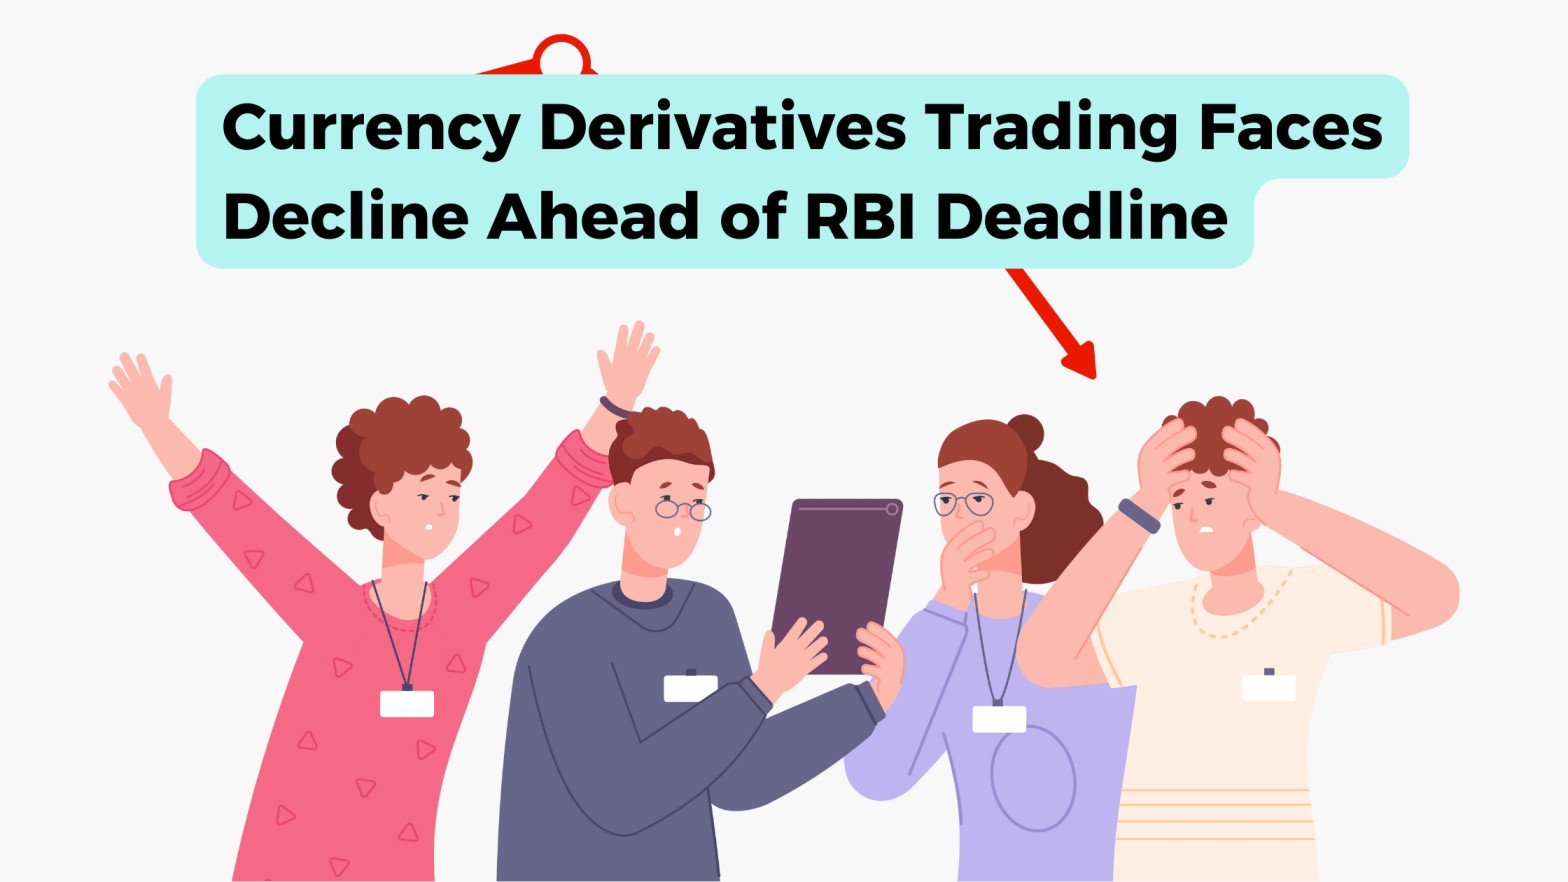 Currency Derivatives Trading Faces Decline Ahead of RBI Deadline